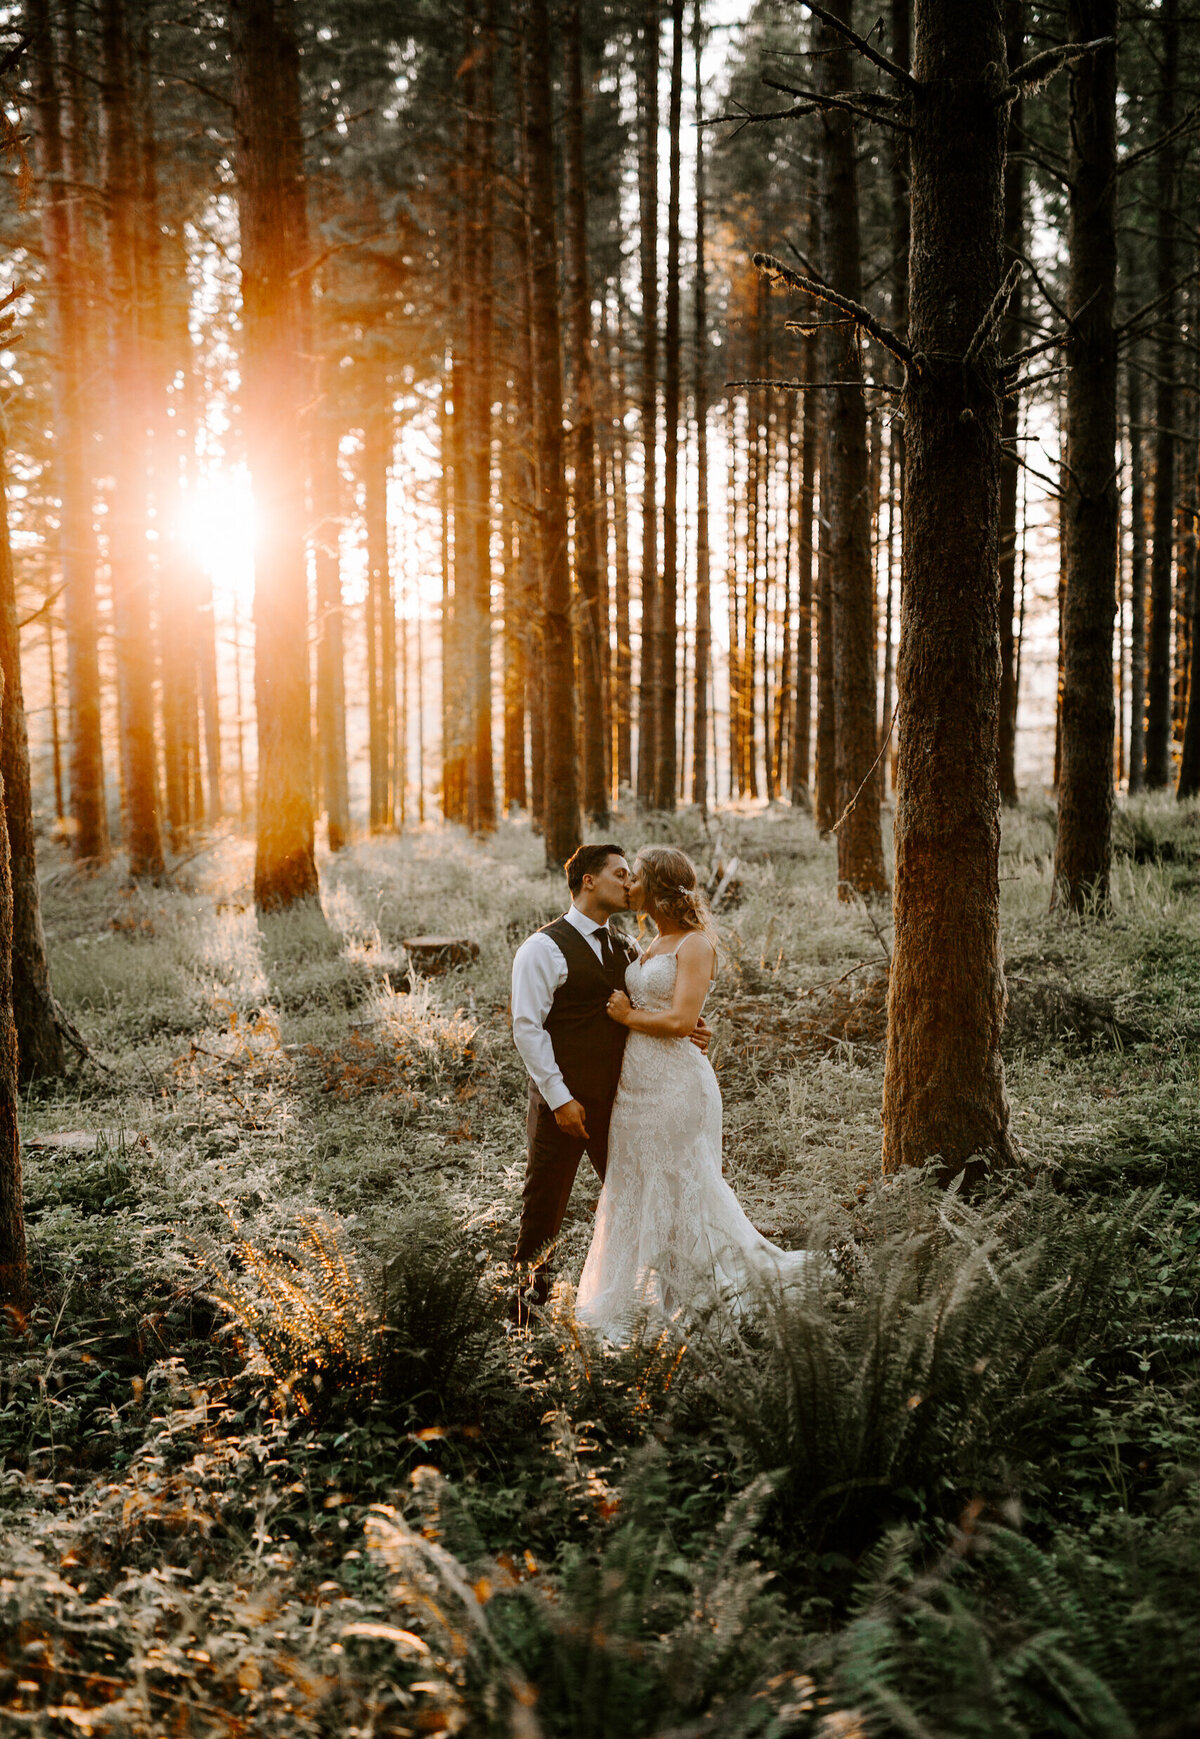 Couple kissing in a fern covered wood after their wedding at sunset